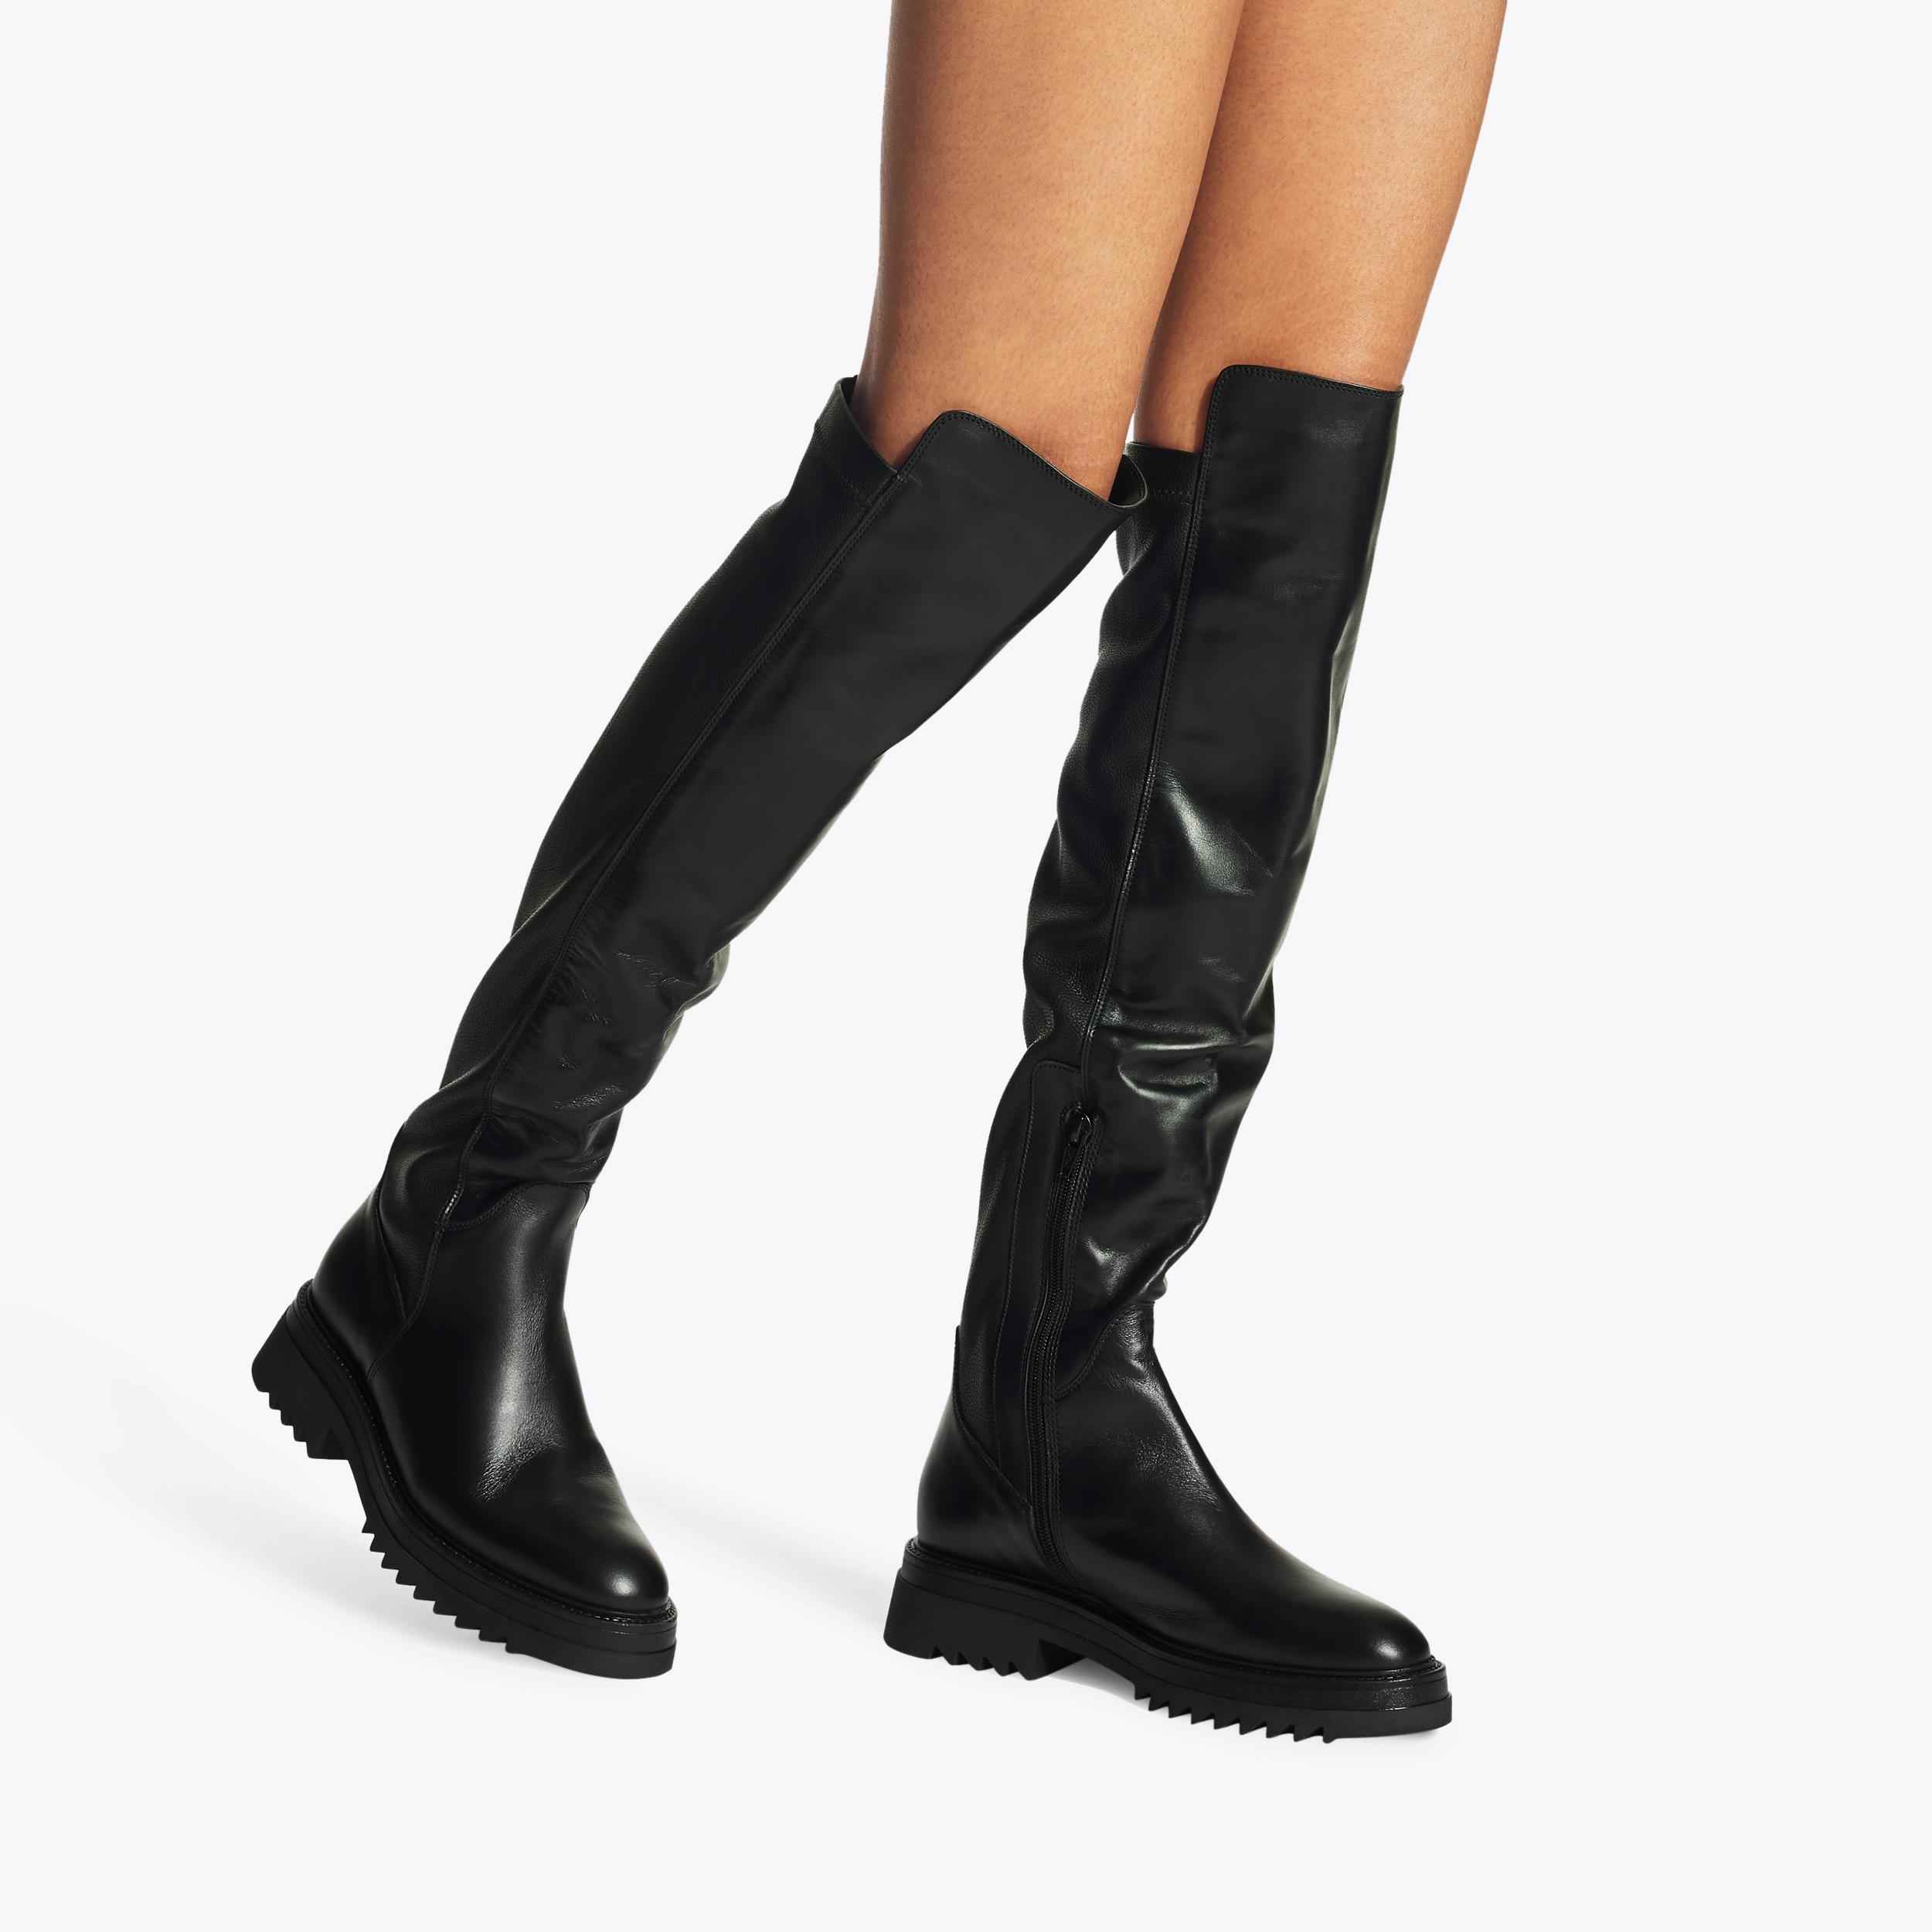 STRONG 50/50 Black Knee High Leather Chelsea Boot by CARVELA